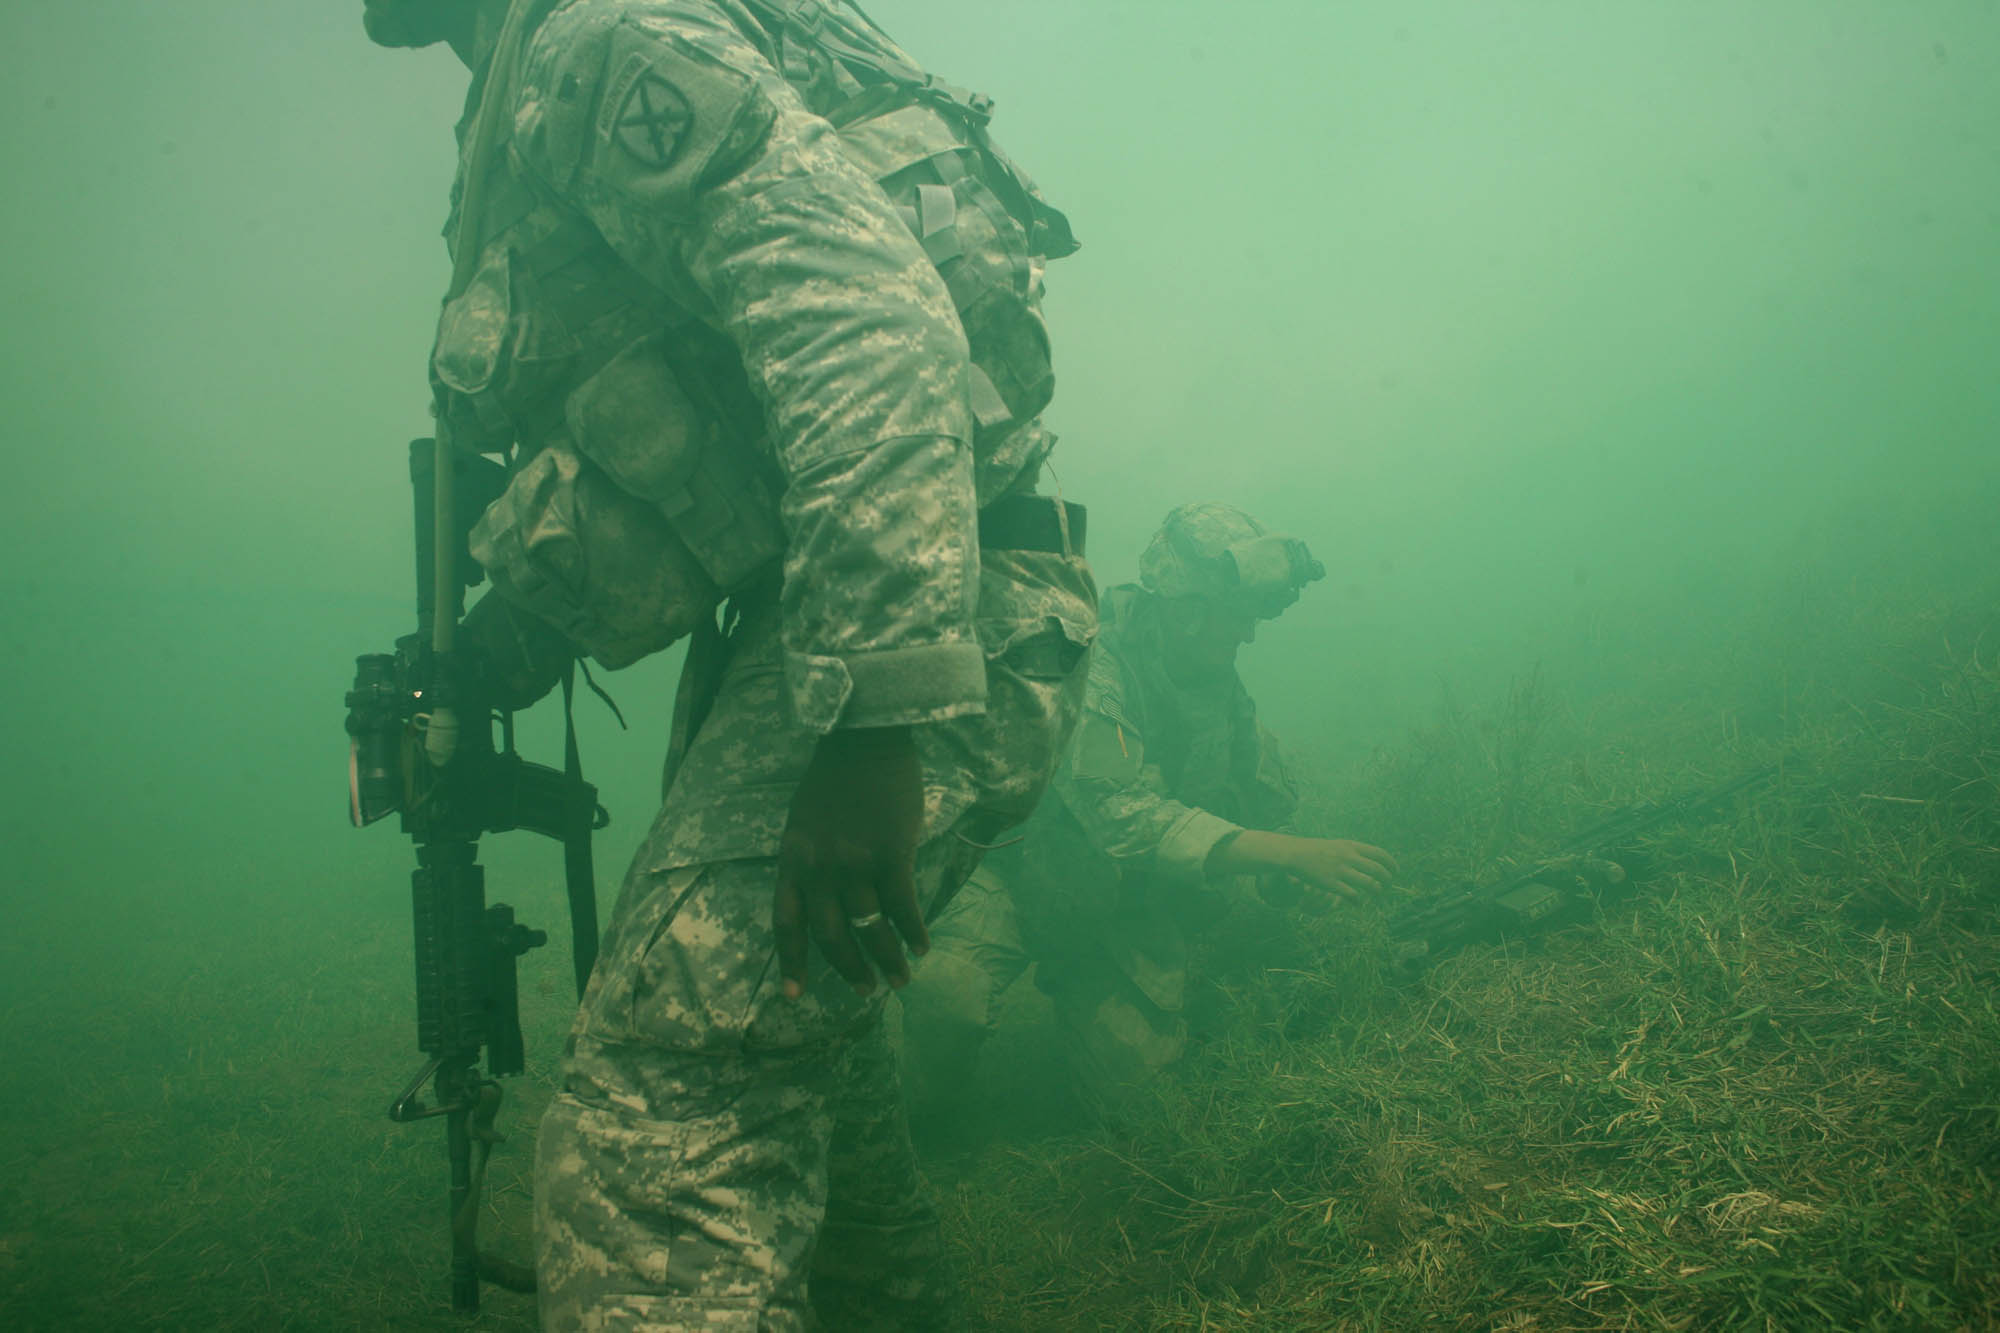 US soldiers on patrol surrounded by green smoke (photo: Michael Kamber)